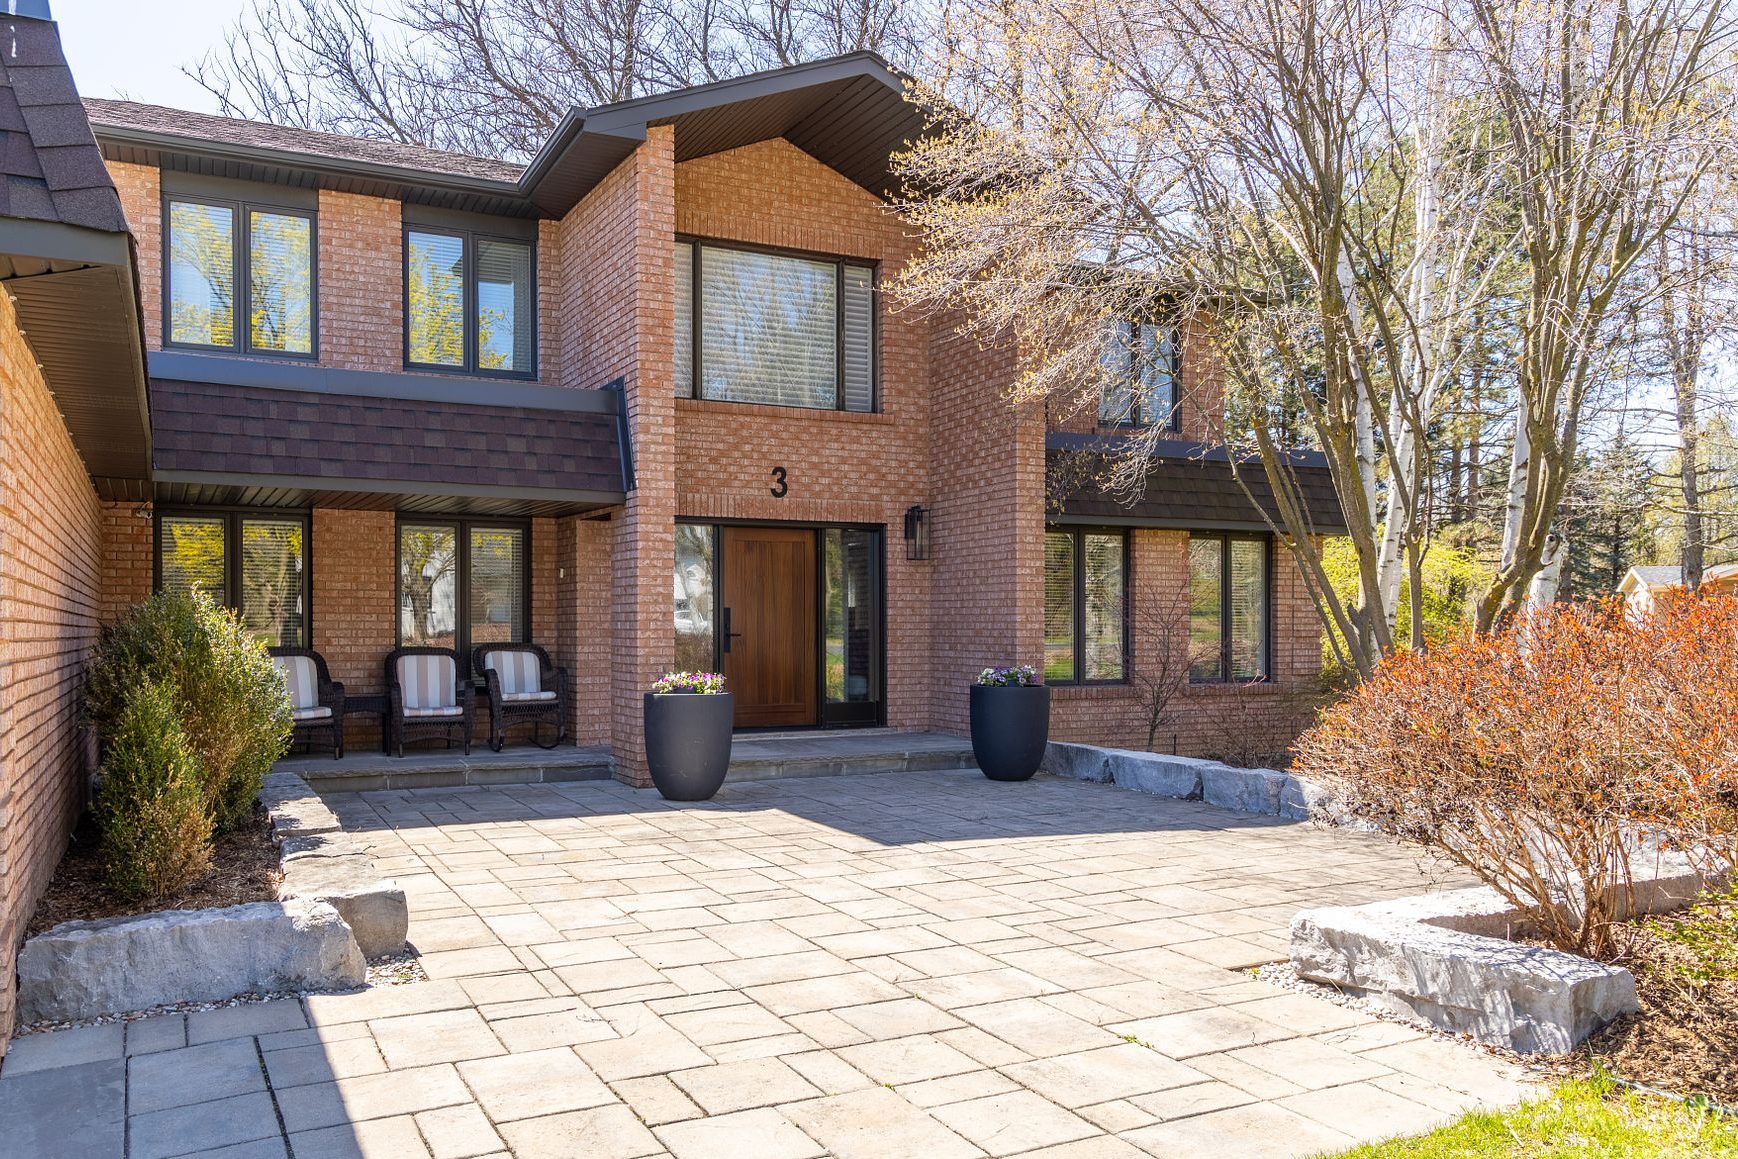 Brampton House of the Week: Mansion with outdoor pool, sauna and high-end appliances